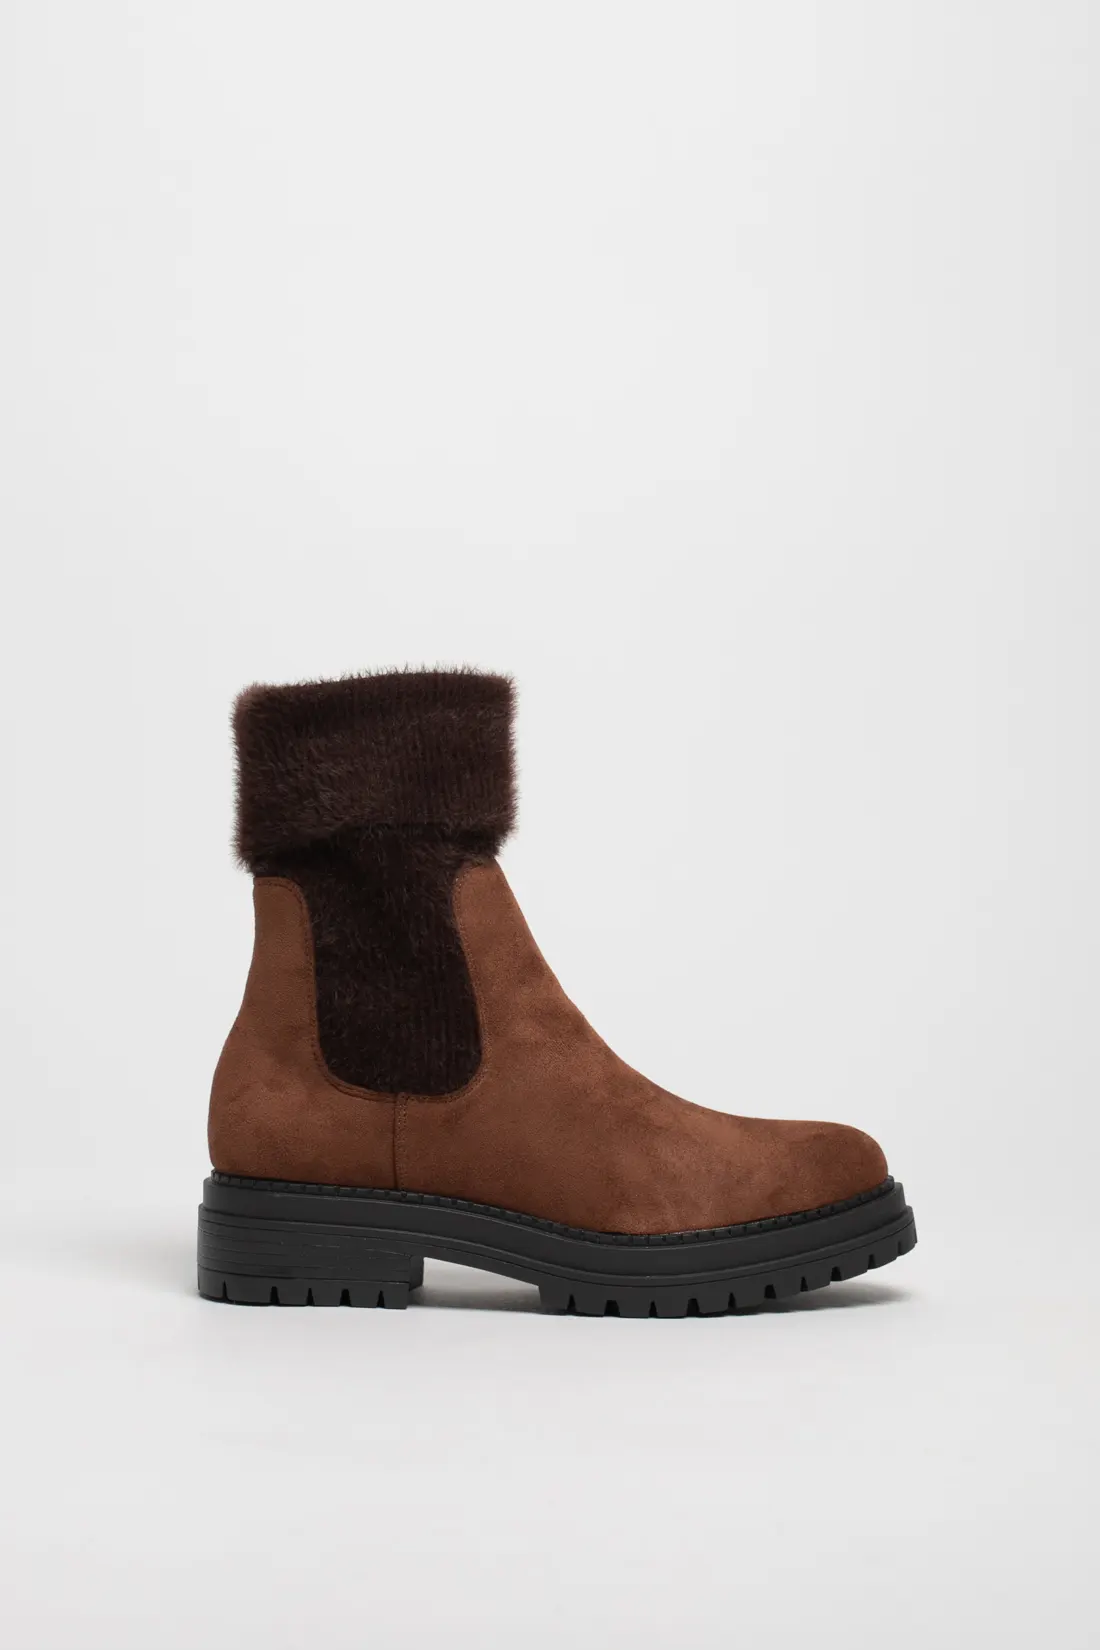 LOW SLOT BOOT - CAMEL